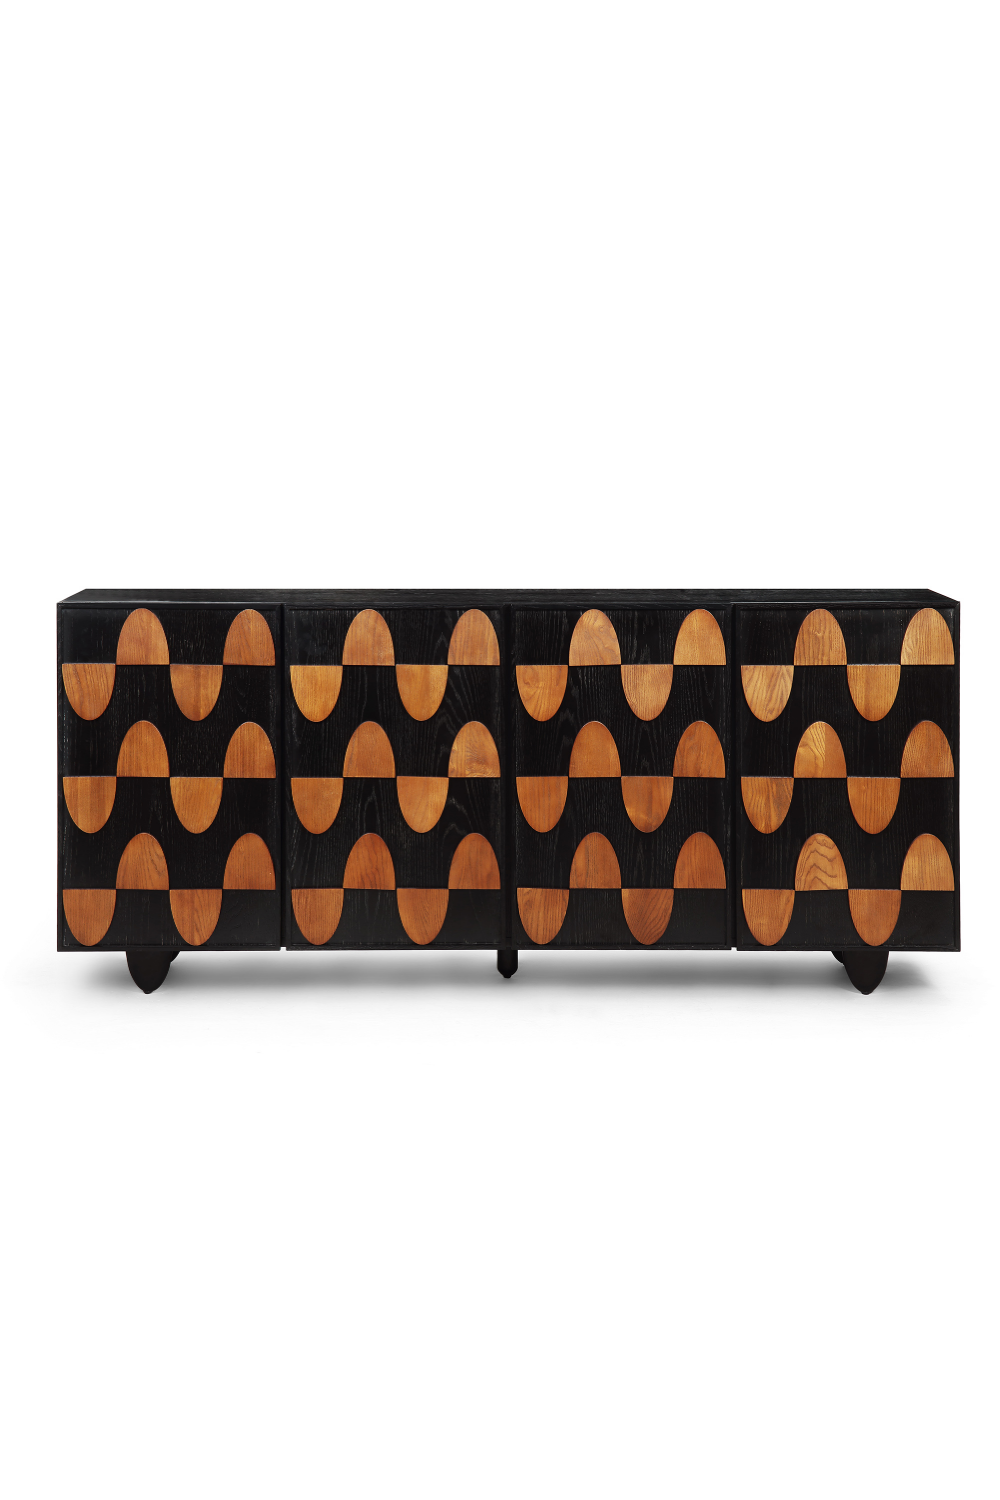 Ash Wood Contemporary Sideboard | Liang & Eimil Mansour | Oroa.com